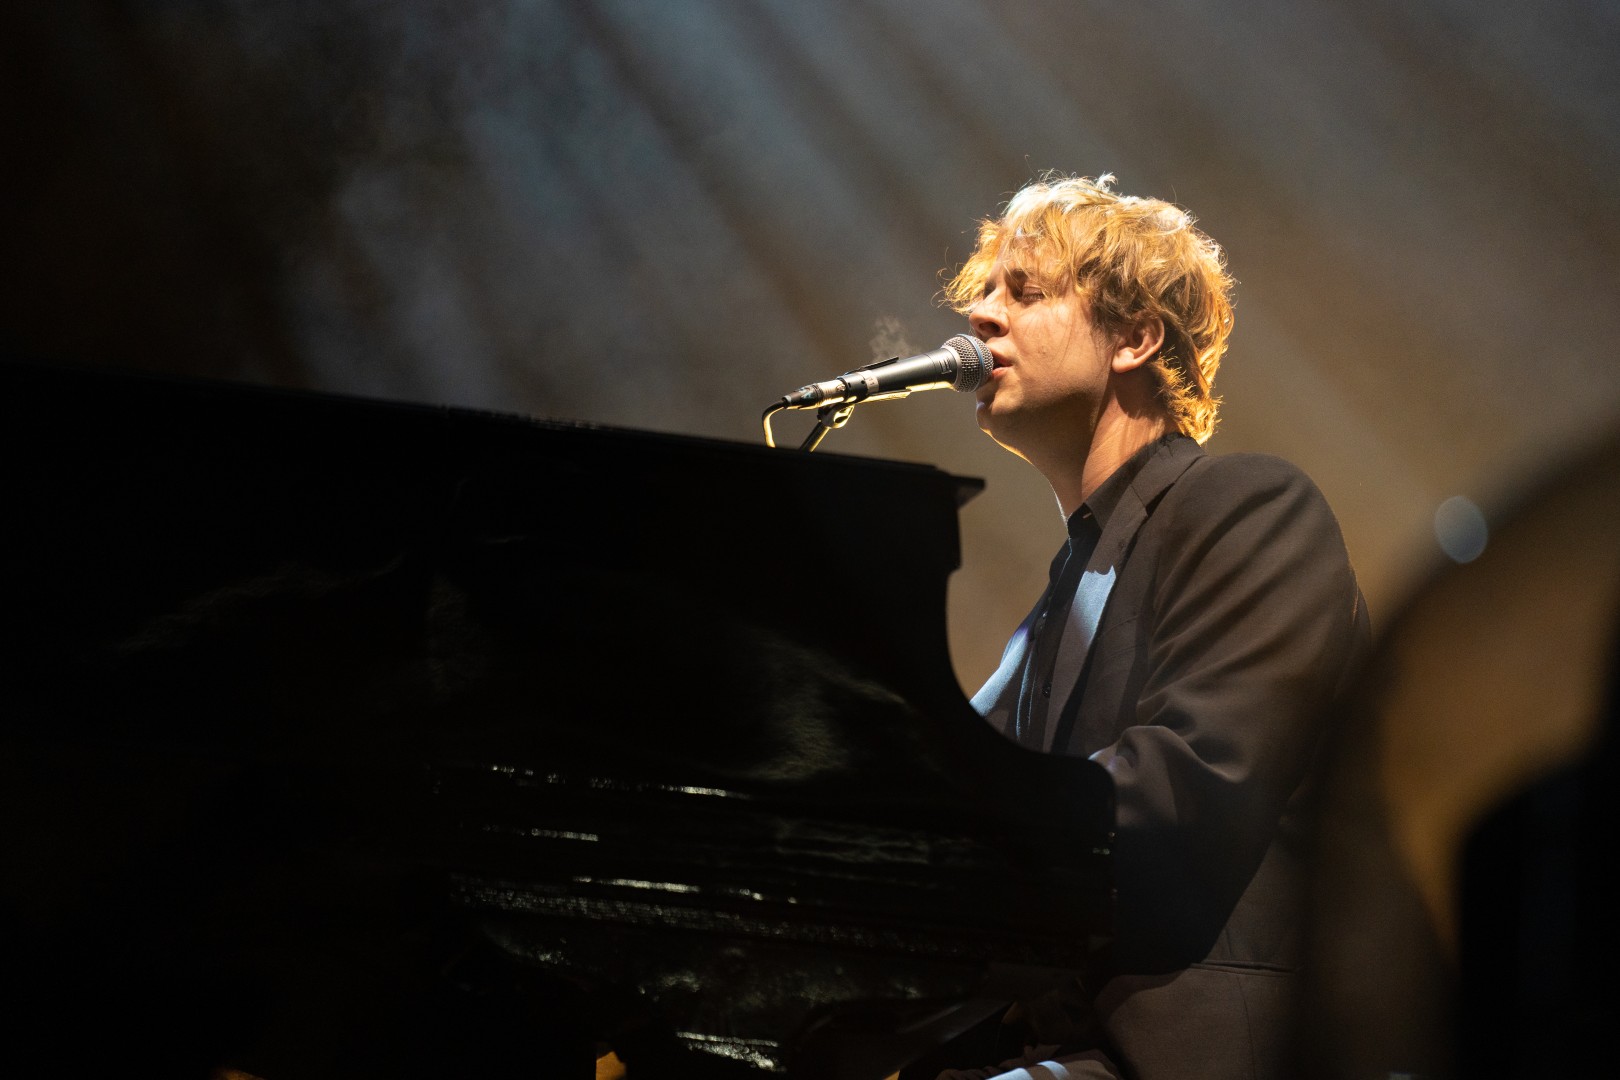 Tom Odell at National Arena in Bucharest on March 12, 2022 (7b5d7d17eb)